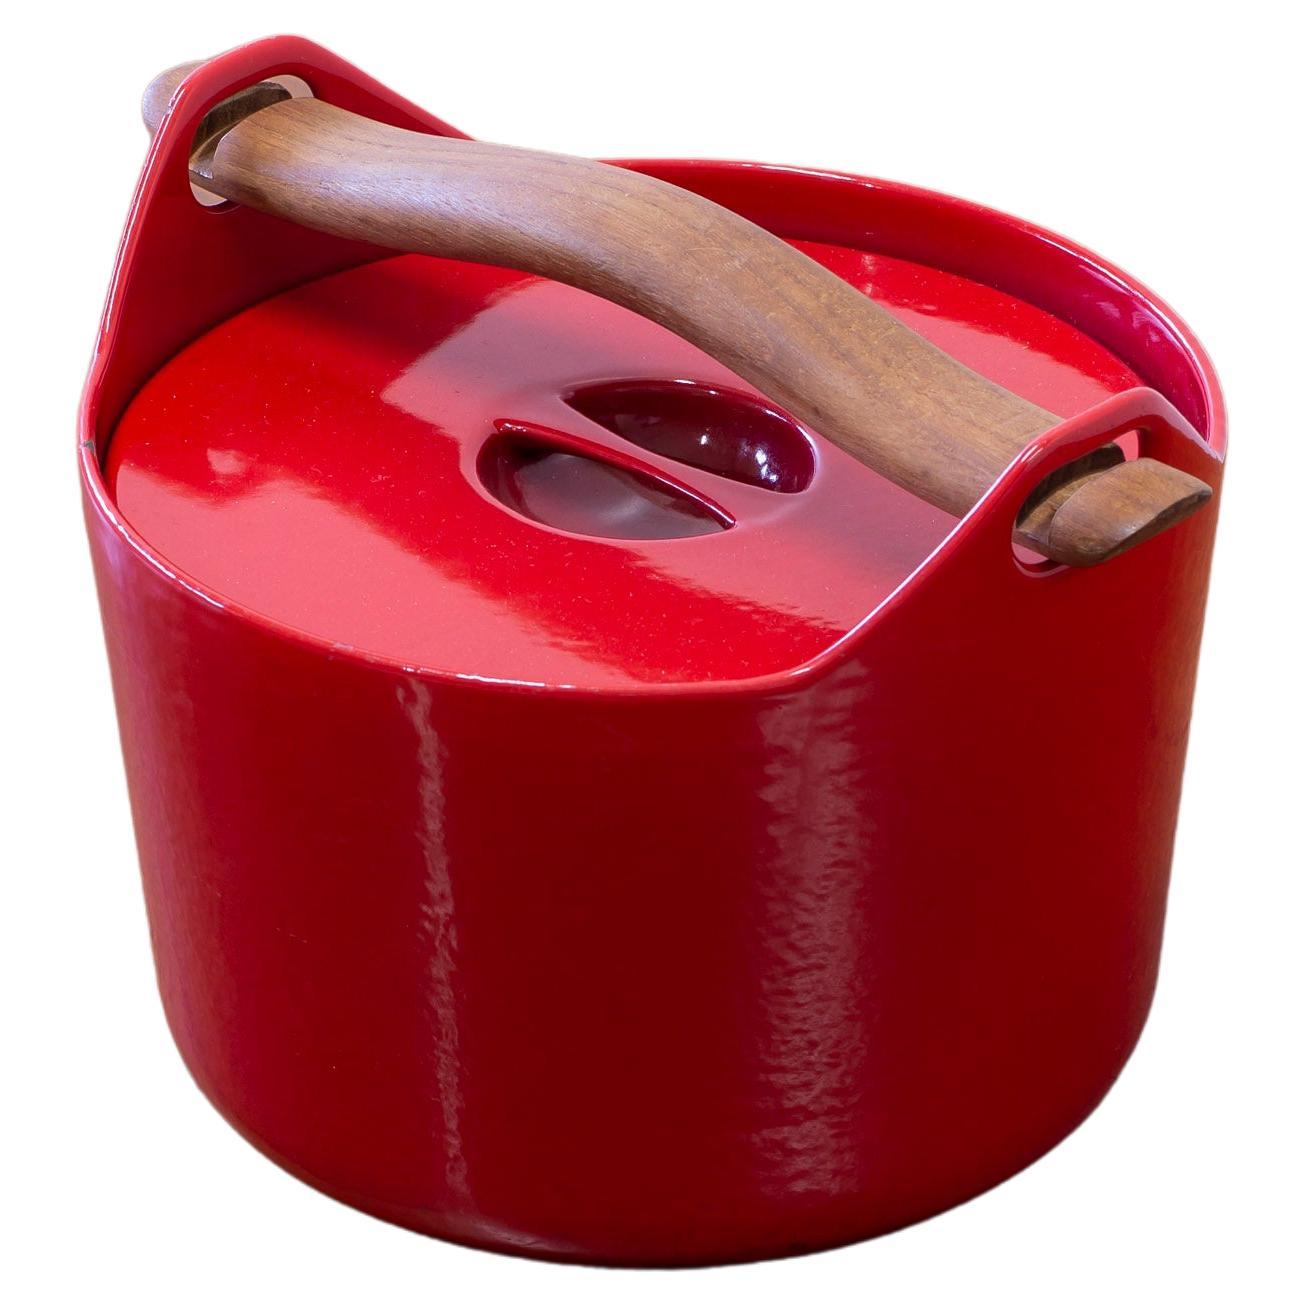 Red enamel cassrole by Timo Sarpaneva. Made in Finland by Rosenlew ca 1960-70s